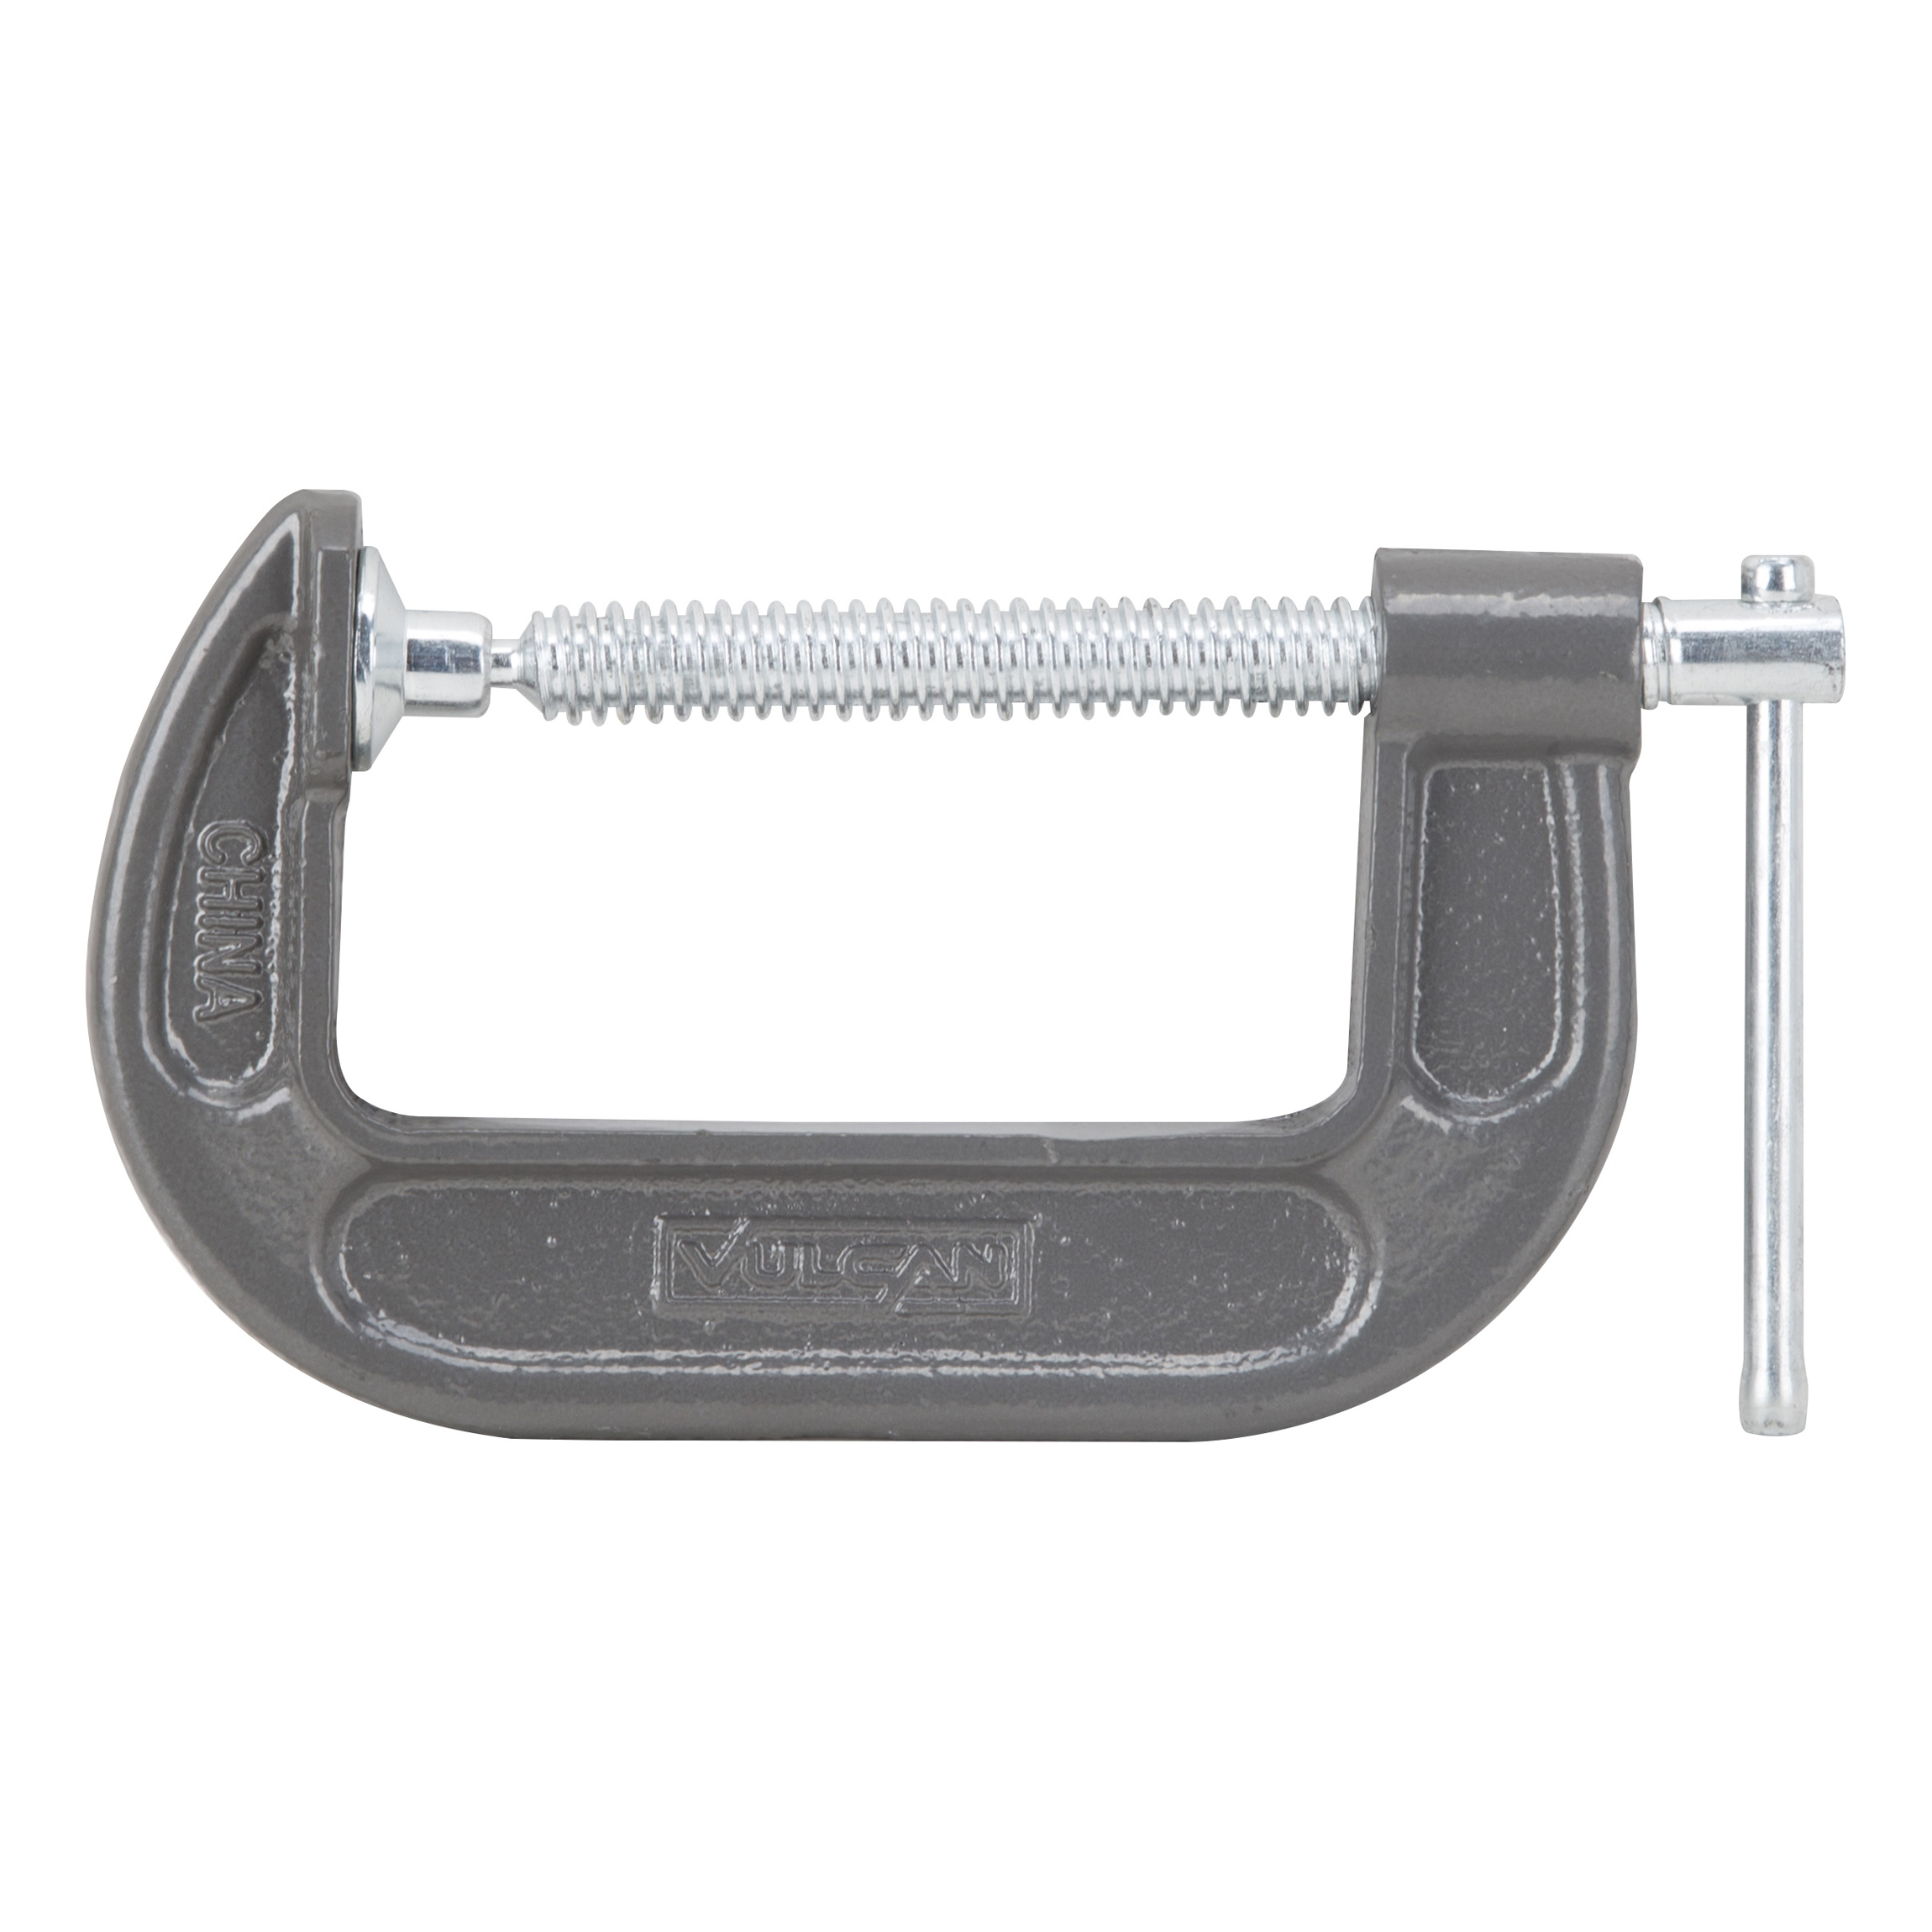 JL27363 C-Clamp, 4 in Max Opening Size, 1-3/4 in D Throat, Steel Body, Gray Body